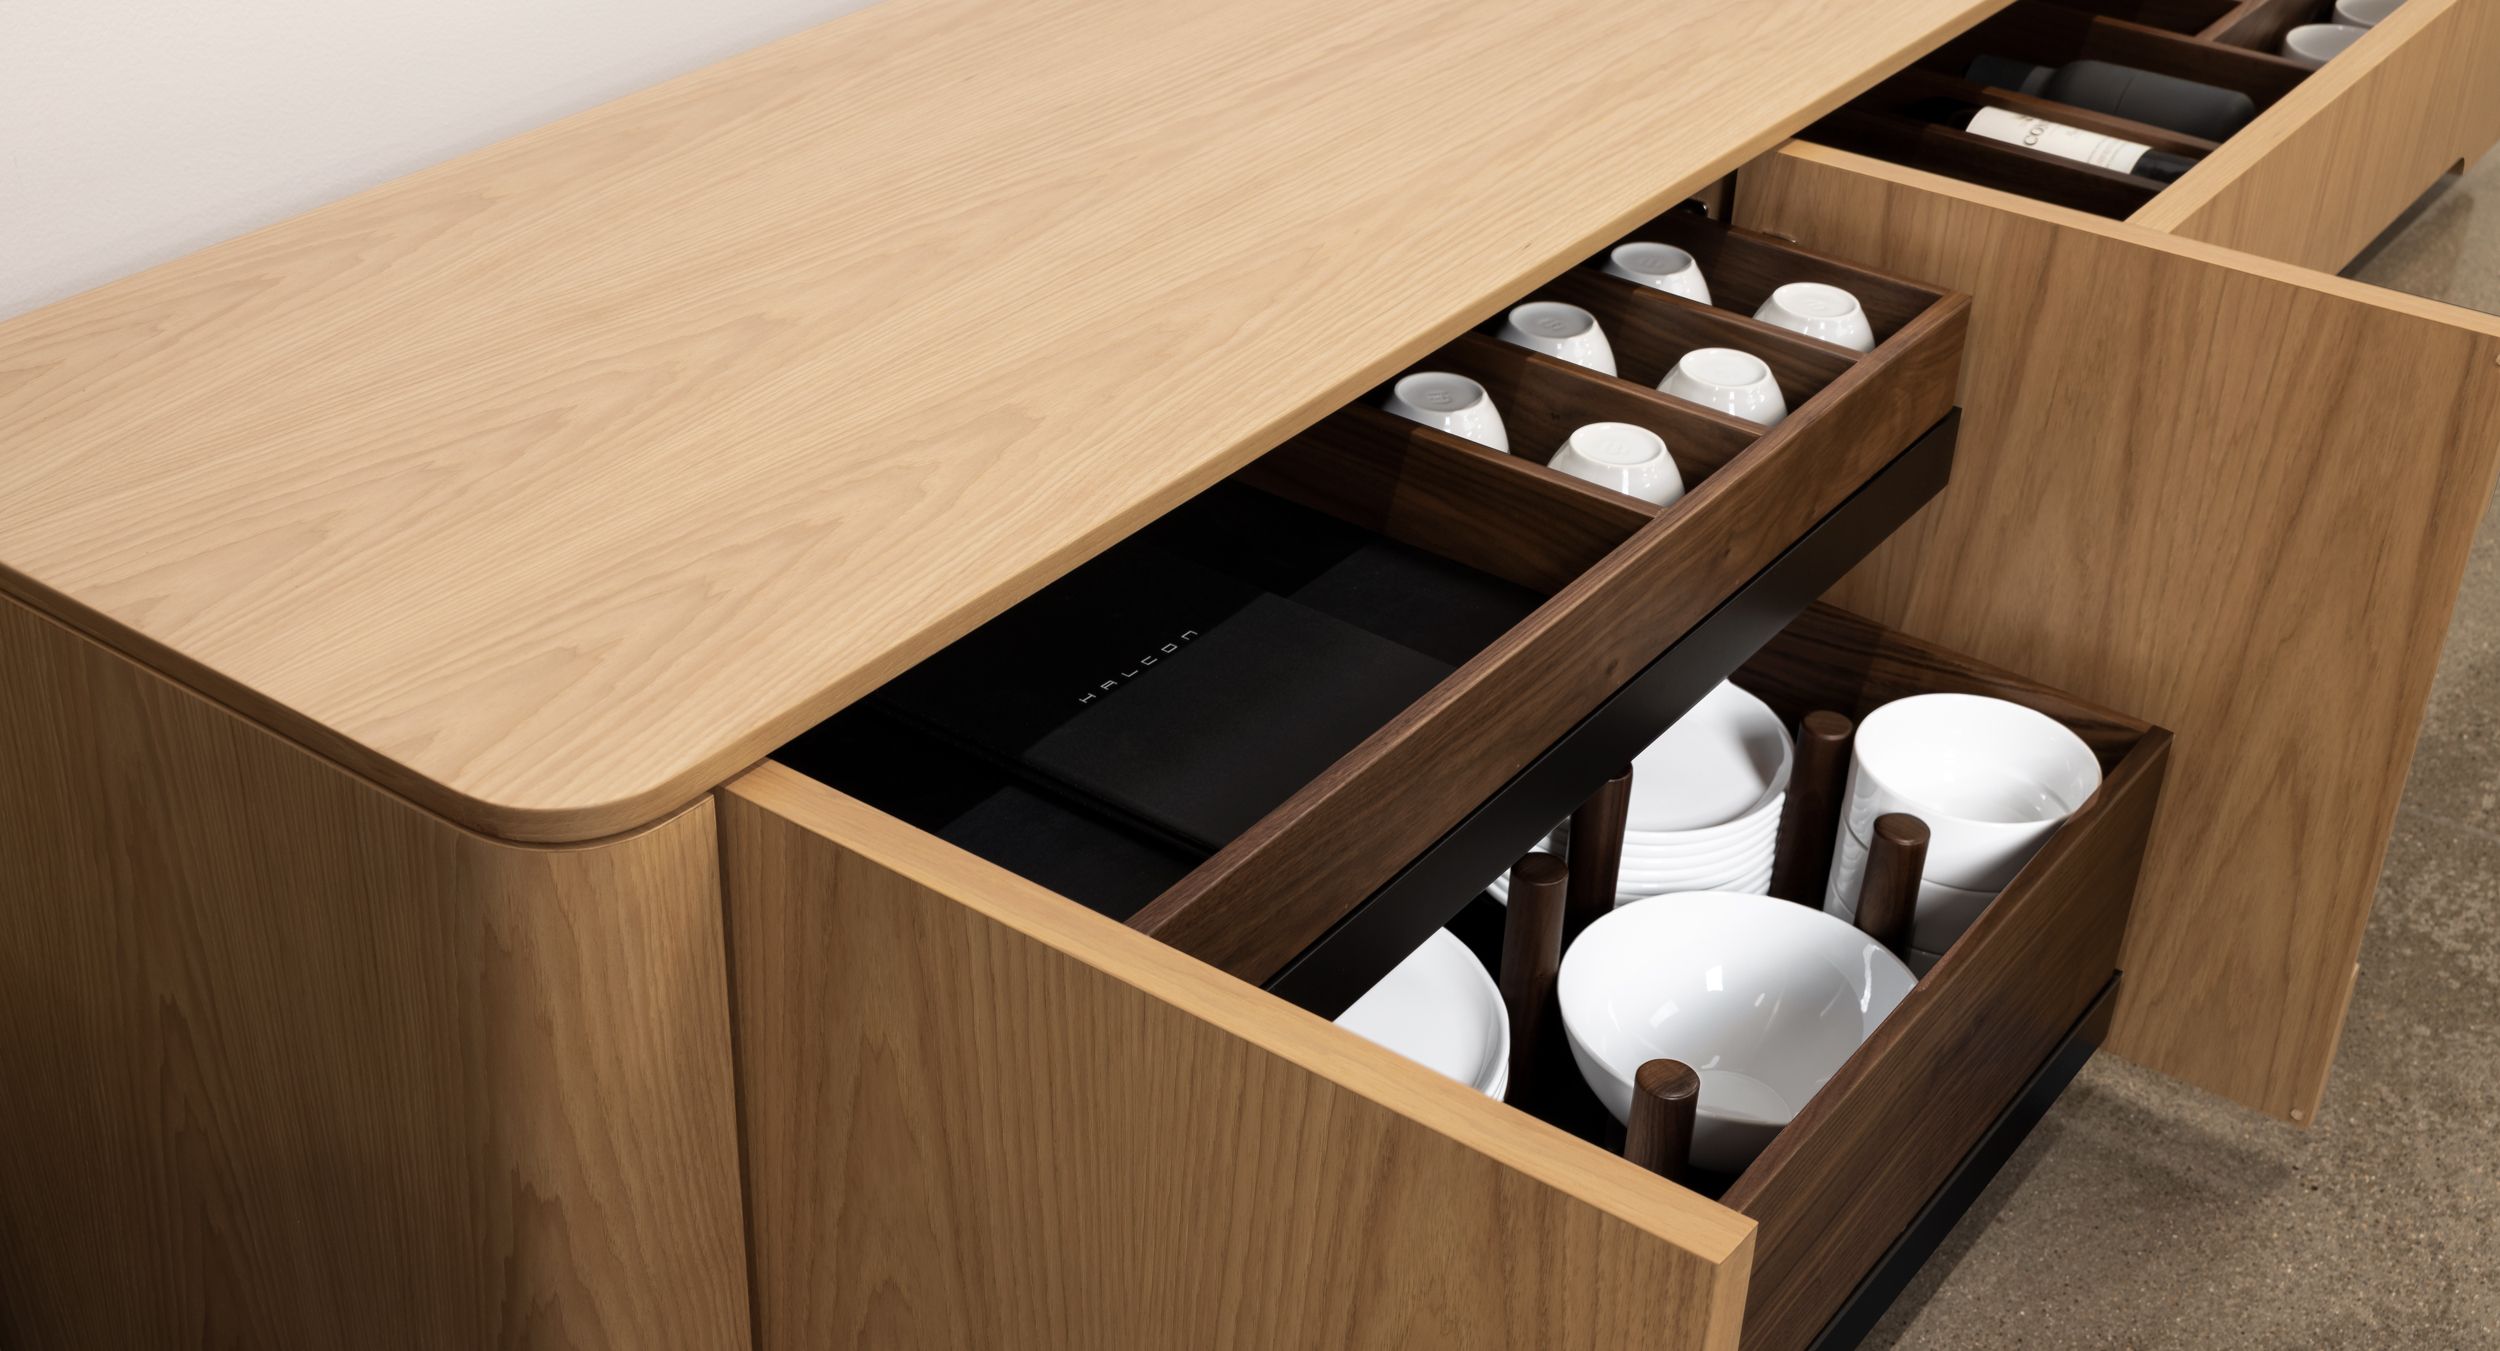 Thoughtful modules accommodate glassware, cutlery, refrigeration, and more.  Solid wood storage trays are easily removed for fast and convenient service.